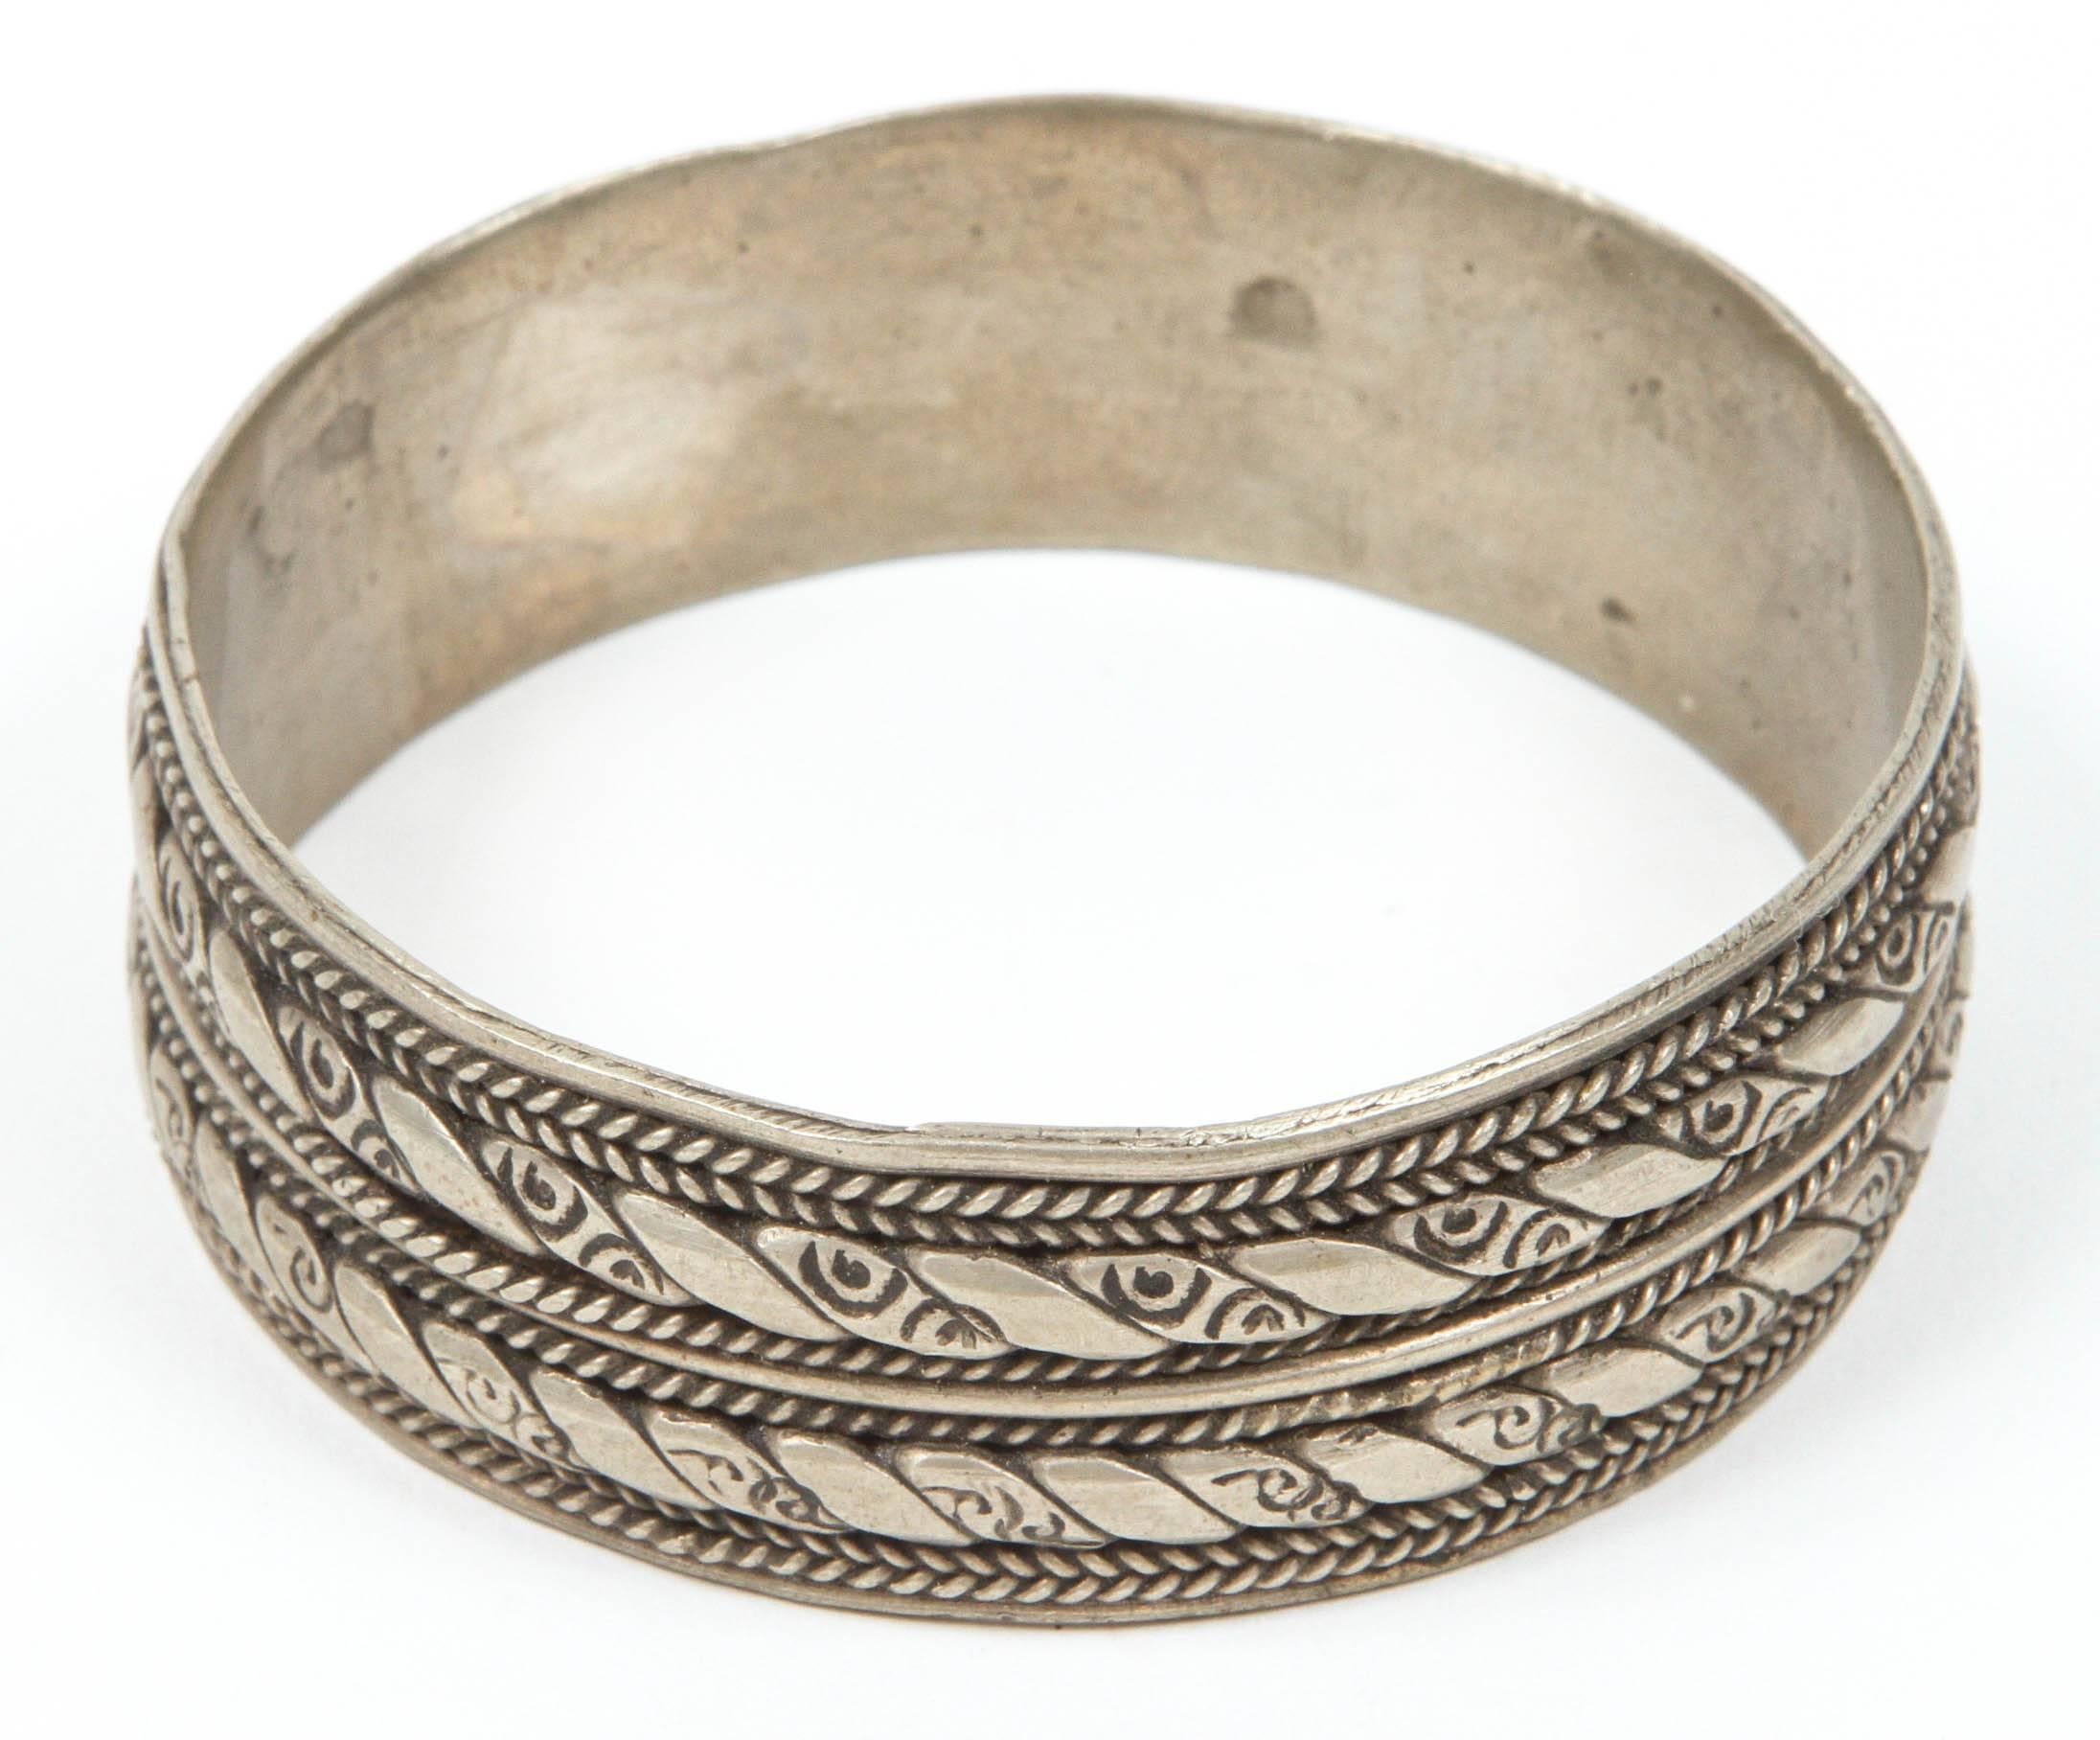 Moroccan Berber tribal bracelet, made from Moroccan coin silver, not pure sterling silver. Vintage Ethnic tribal cuff, overlaid with chasing details. Bedouin and nomadic ethnic jewelry from the Maghreb, Morocco and North Africa is usually